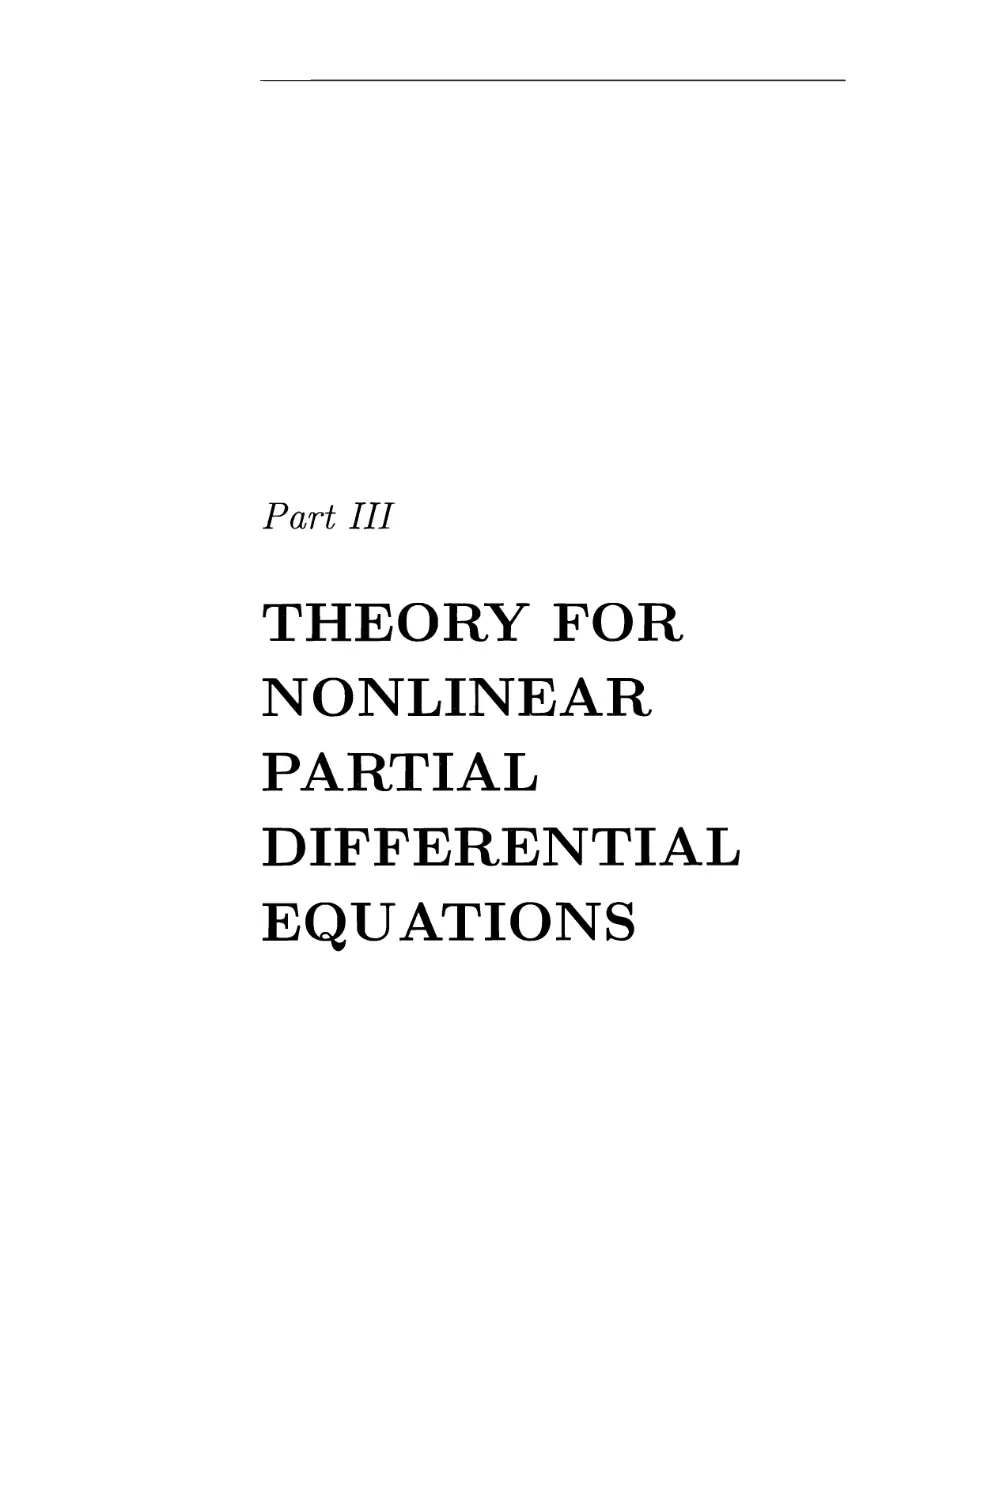 PART III: THEORY FOR NONLINEAR PARTIAL DIFFERENTIAL EQUATIONS